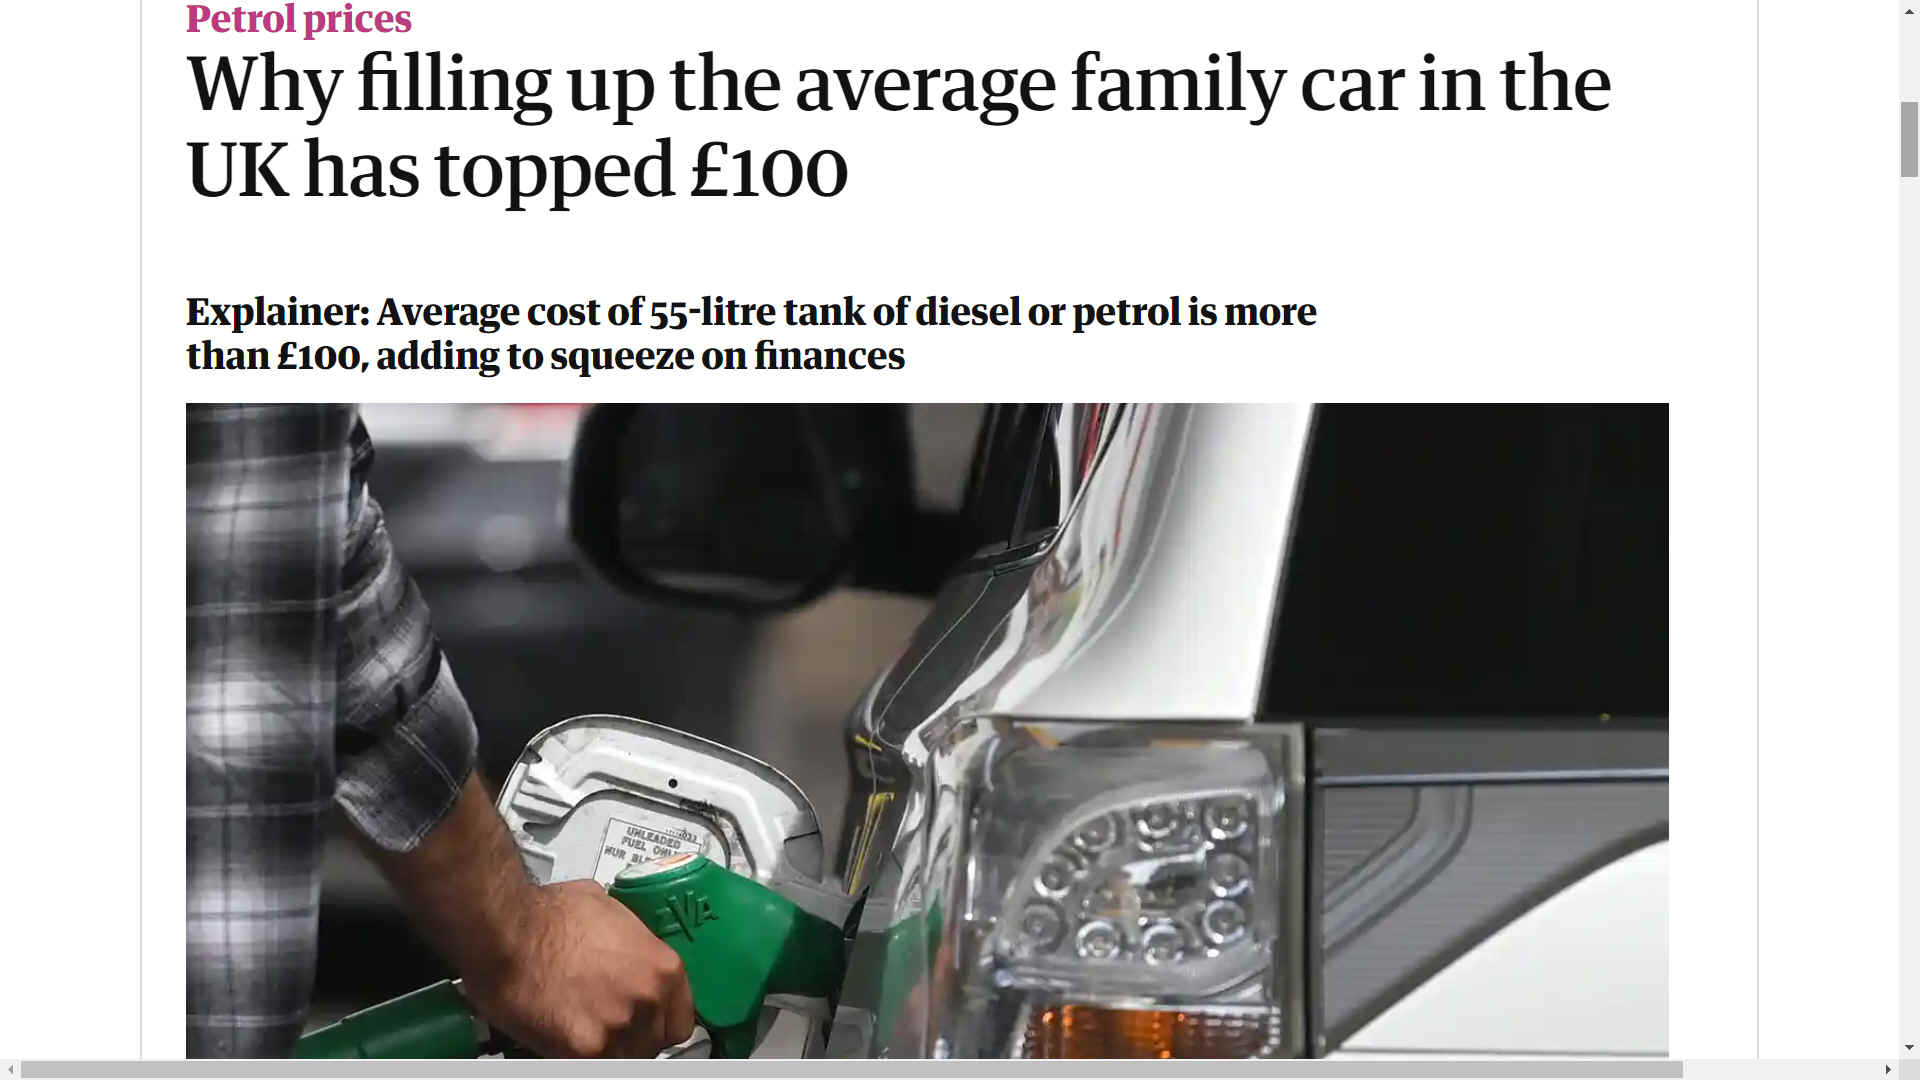 £100 pounds for a tankful of petrol